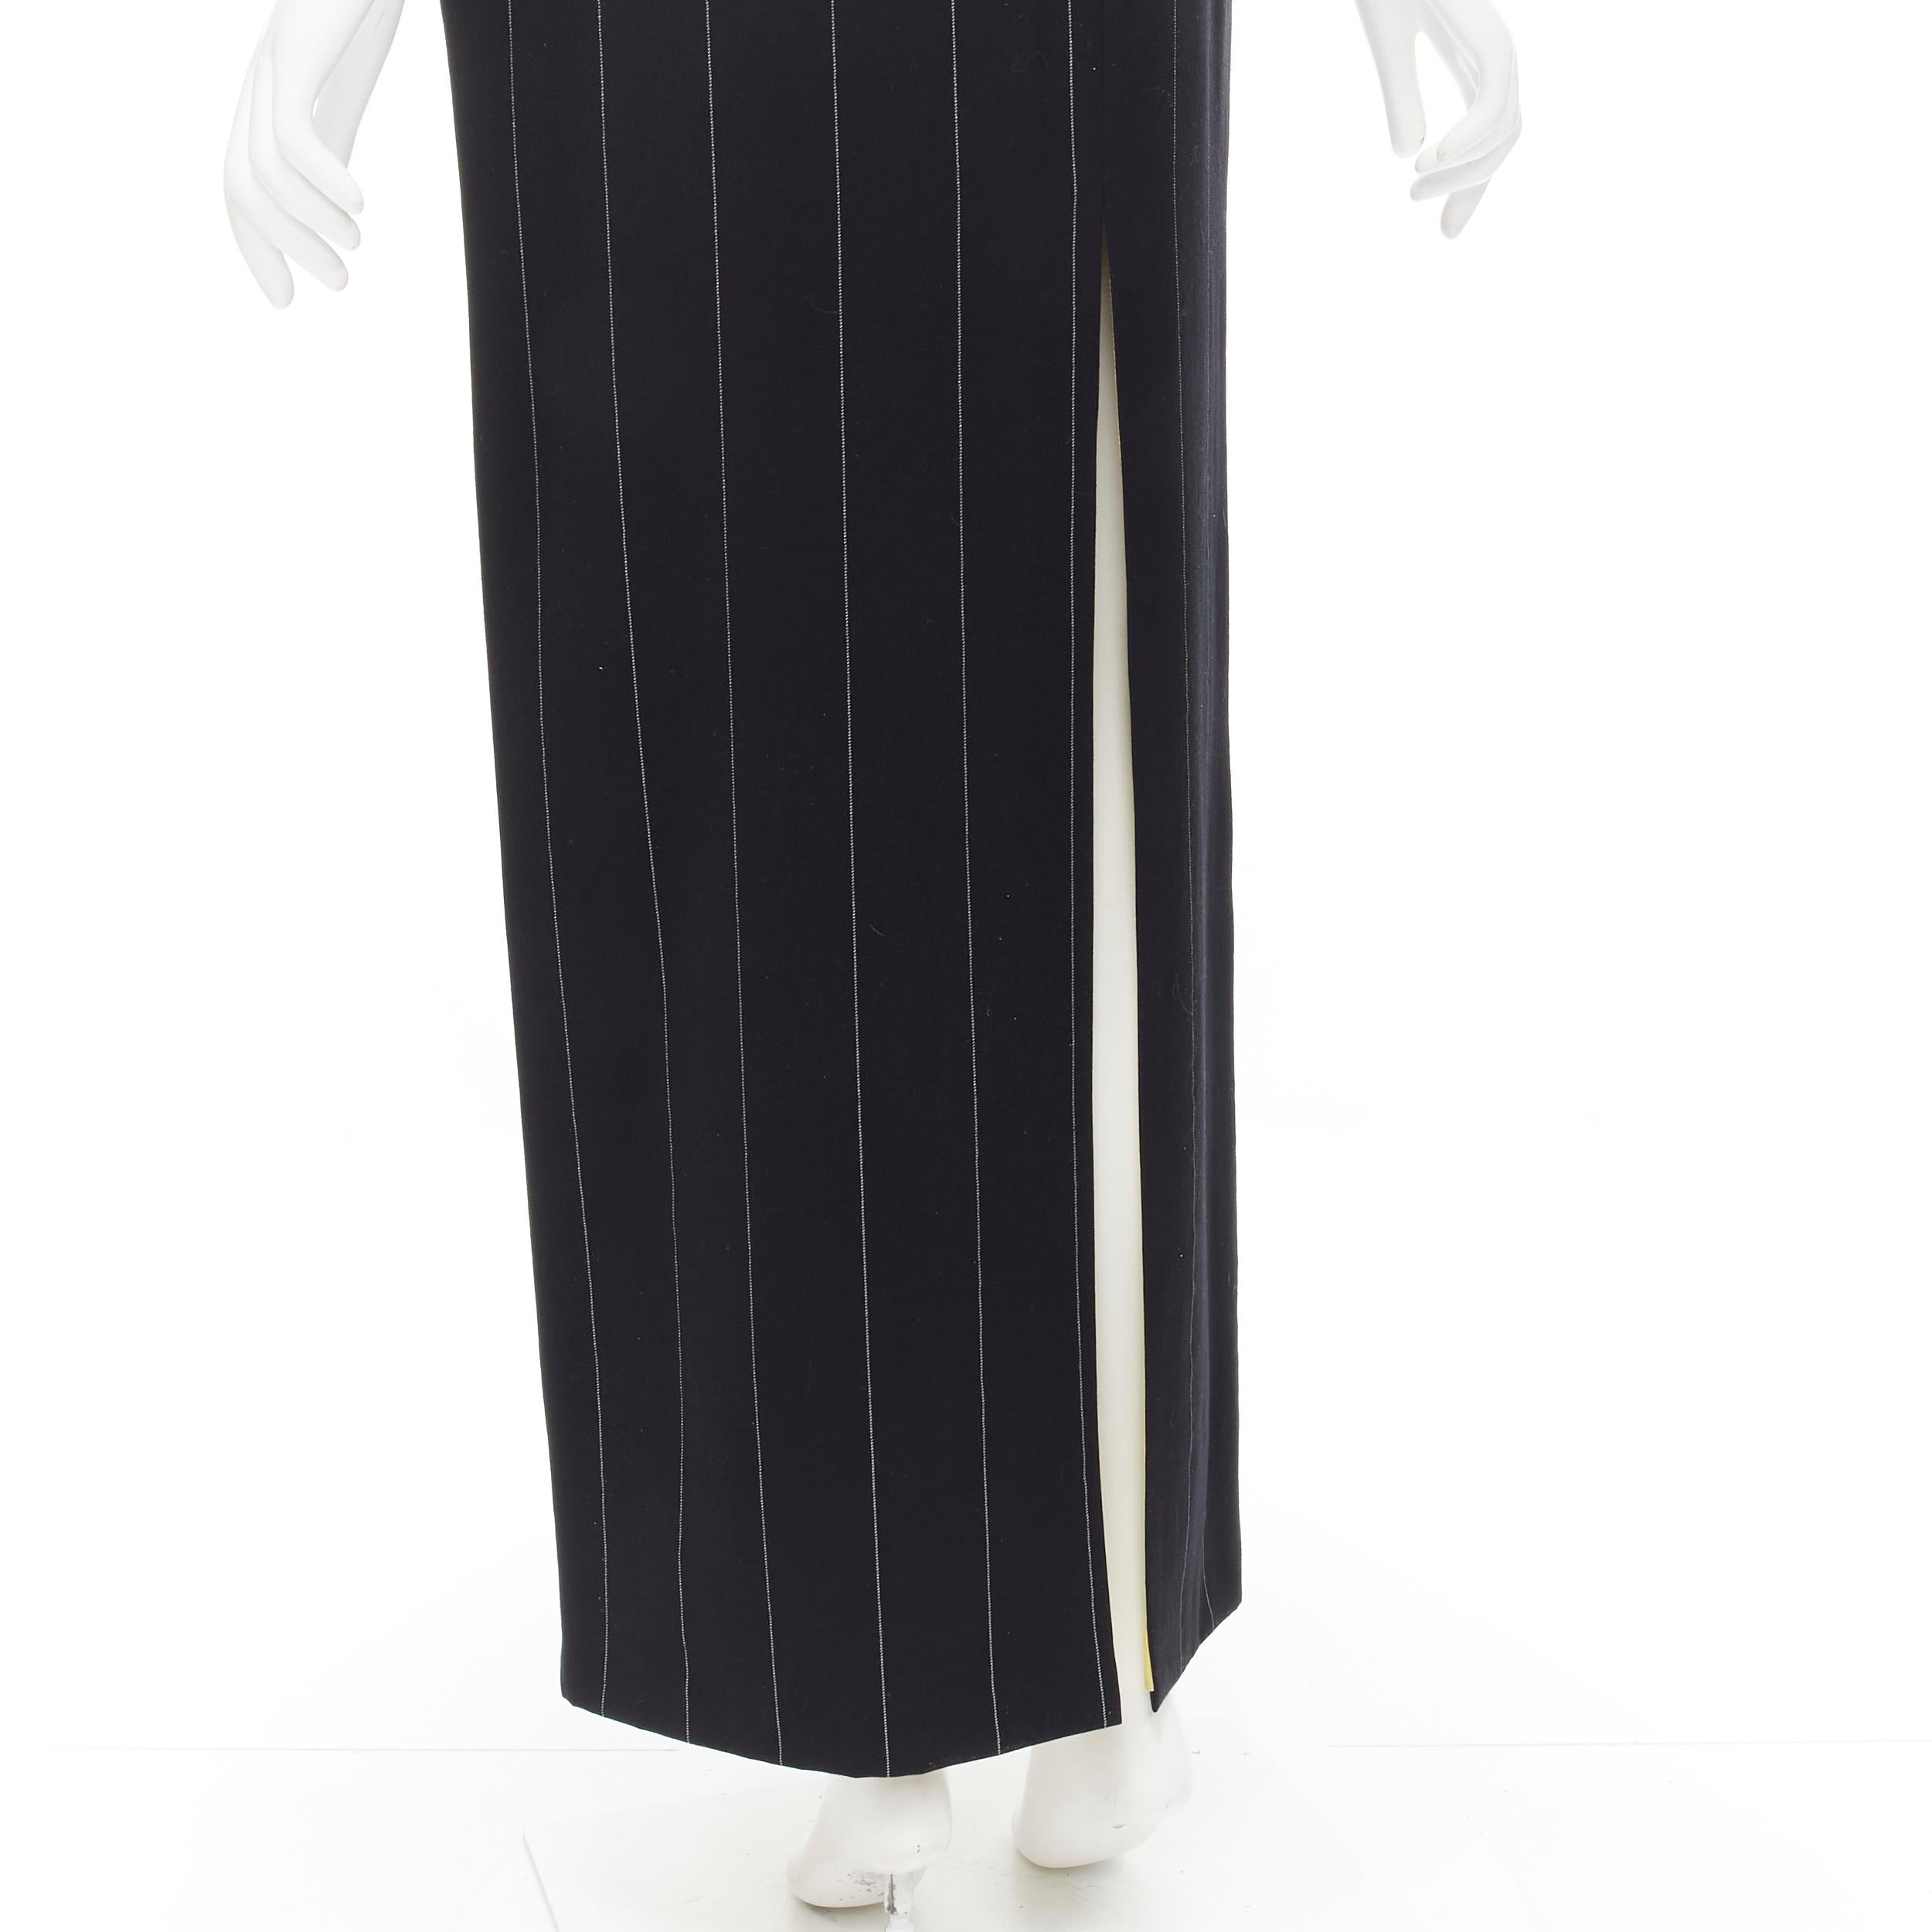 GIANNI VERSACE 1998 Vintage black wide pinstriped wool high slit skirt FR40 M 
Reference: GIYG/A00127 
Brand: Gianni Versace 
Material: Wool 
Color: Black 
Pattern: Striped 
Closure: Zip 
Extra Detail: Black with white stripes. Contrast yellow rayon